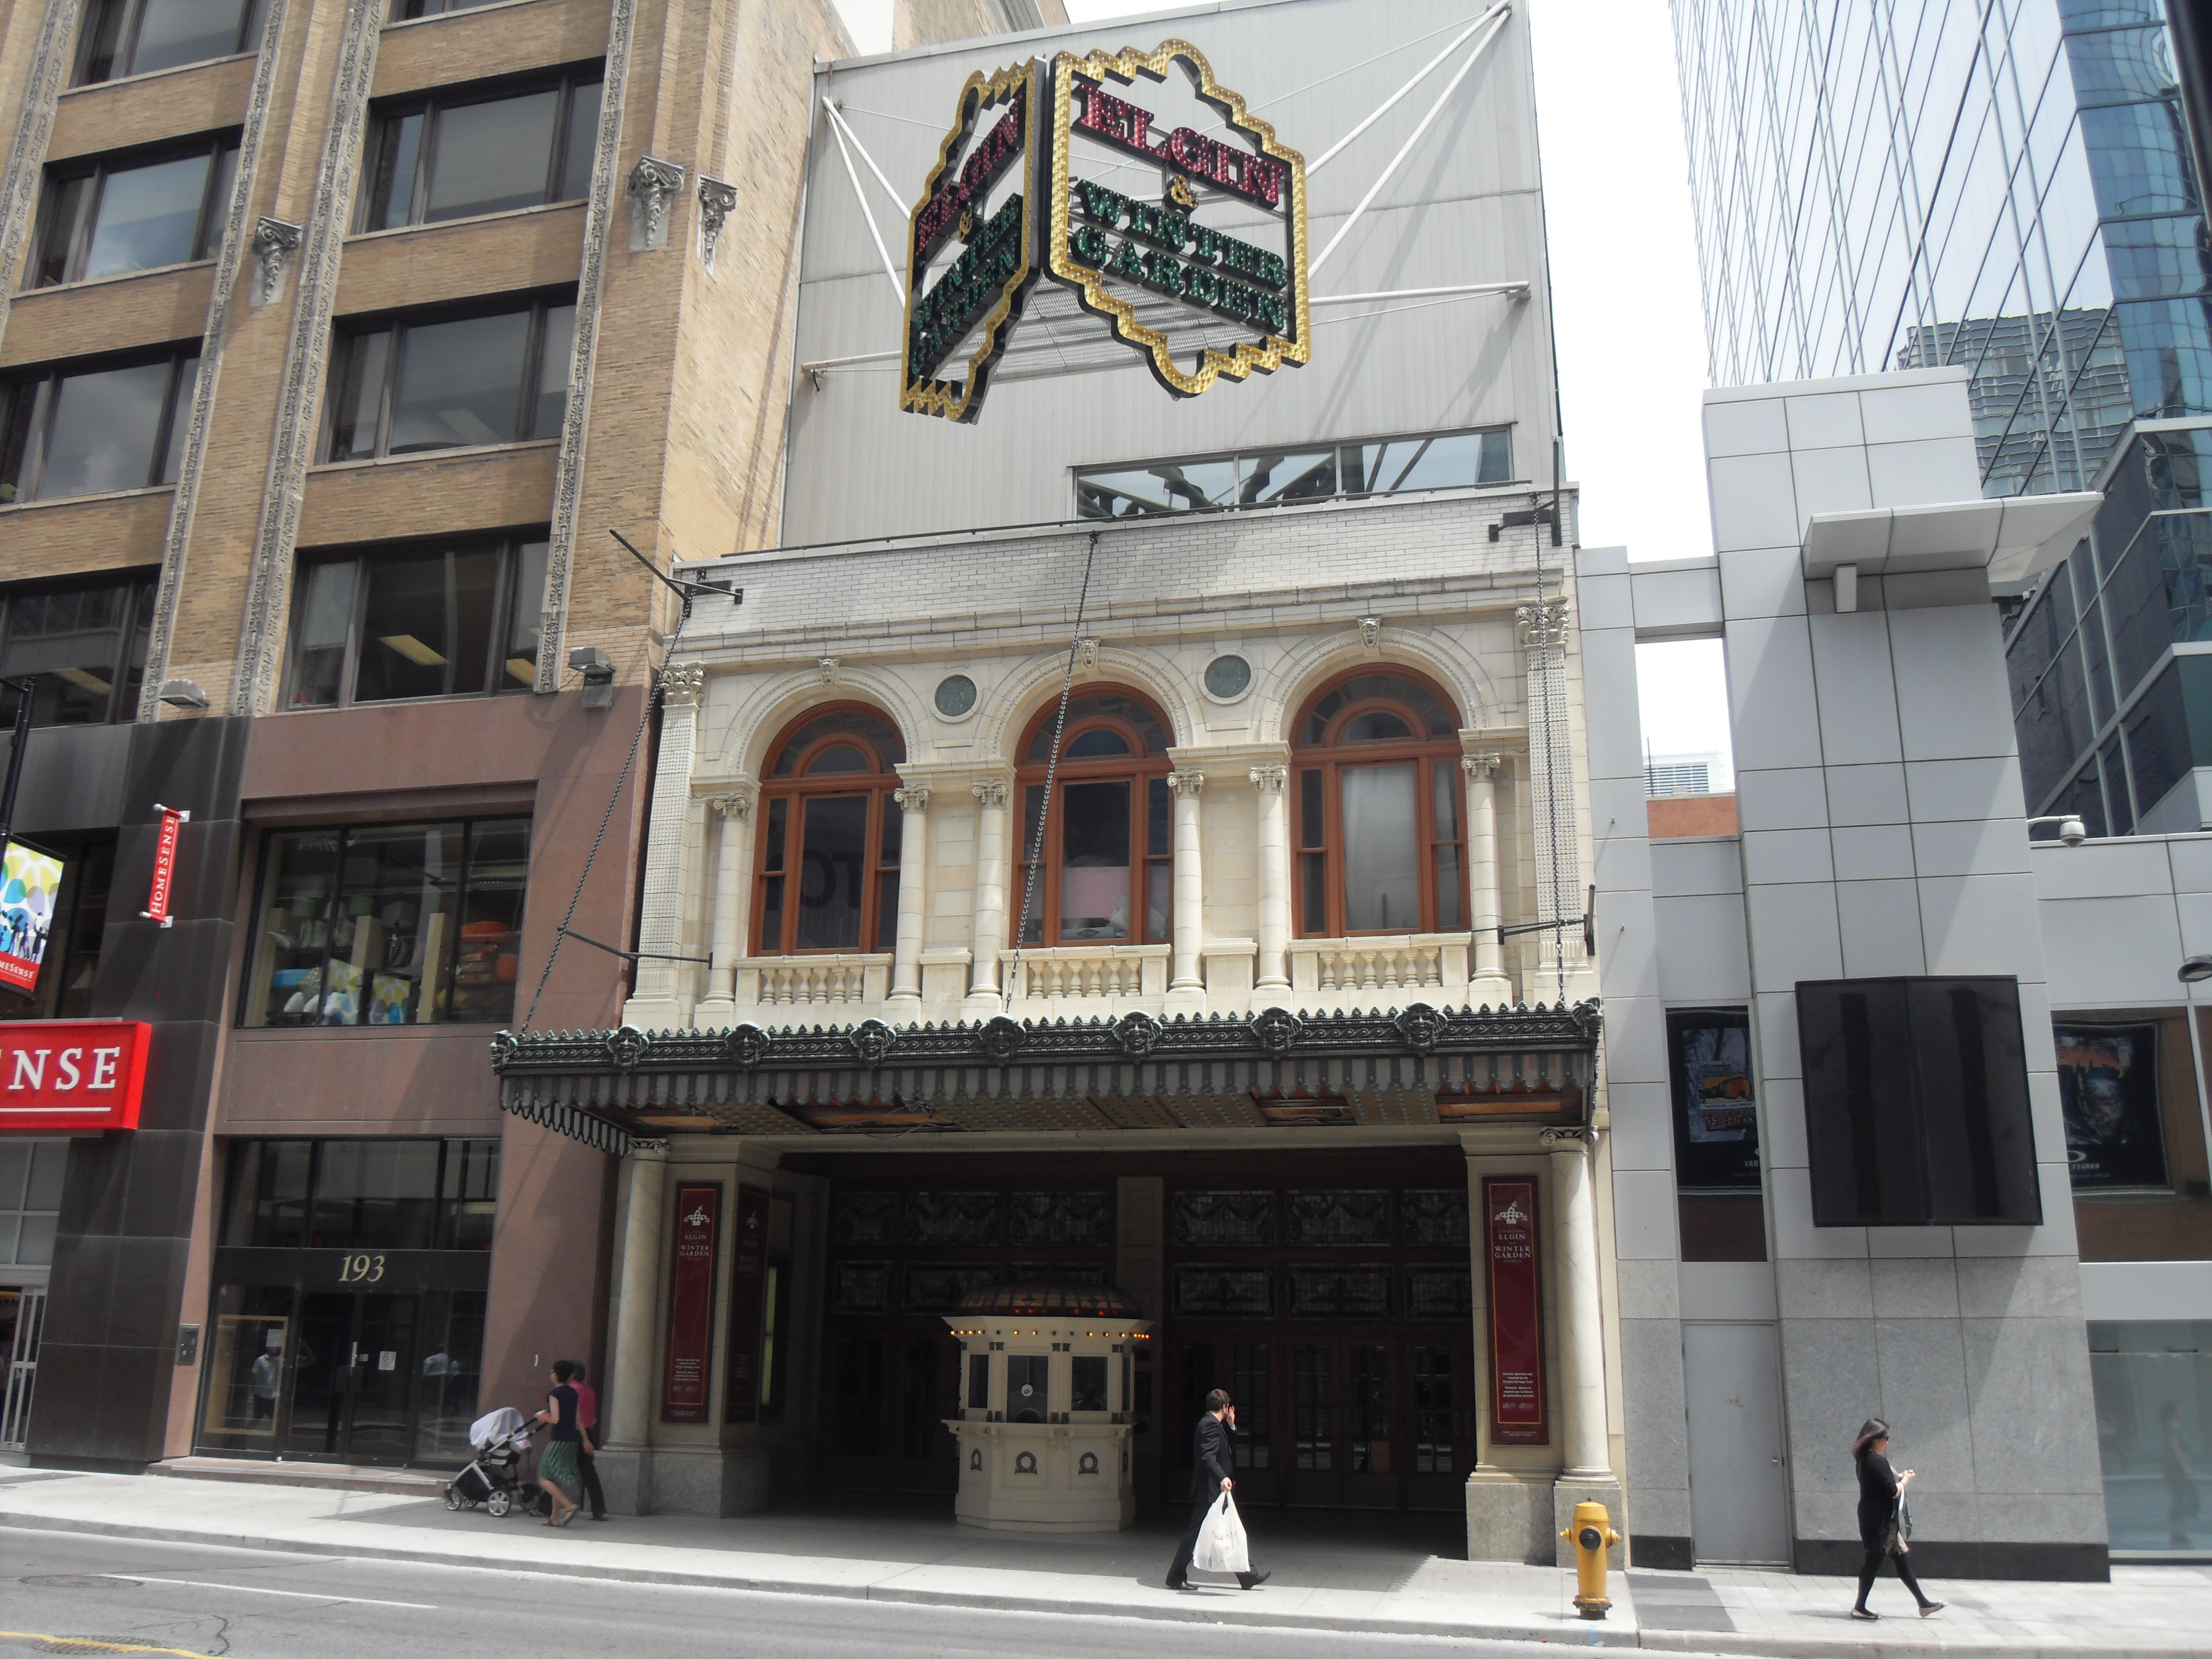 Elgin And Winter Garden Theatres - Wikiwand